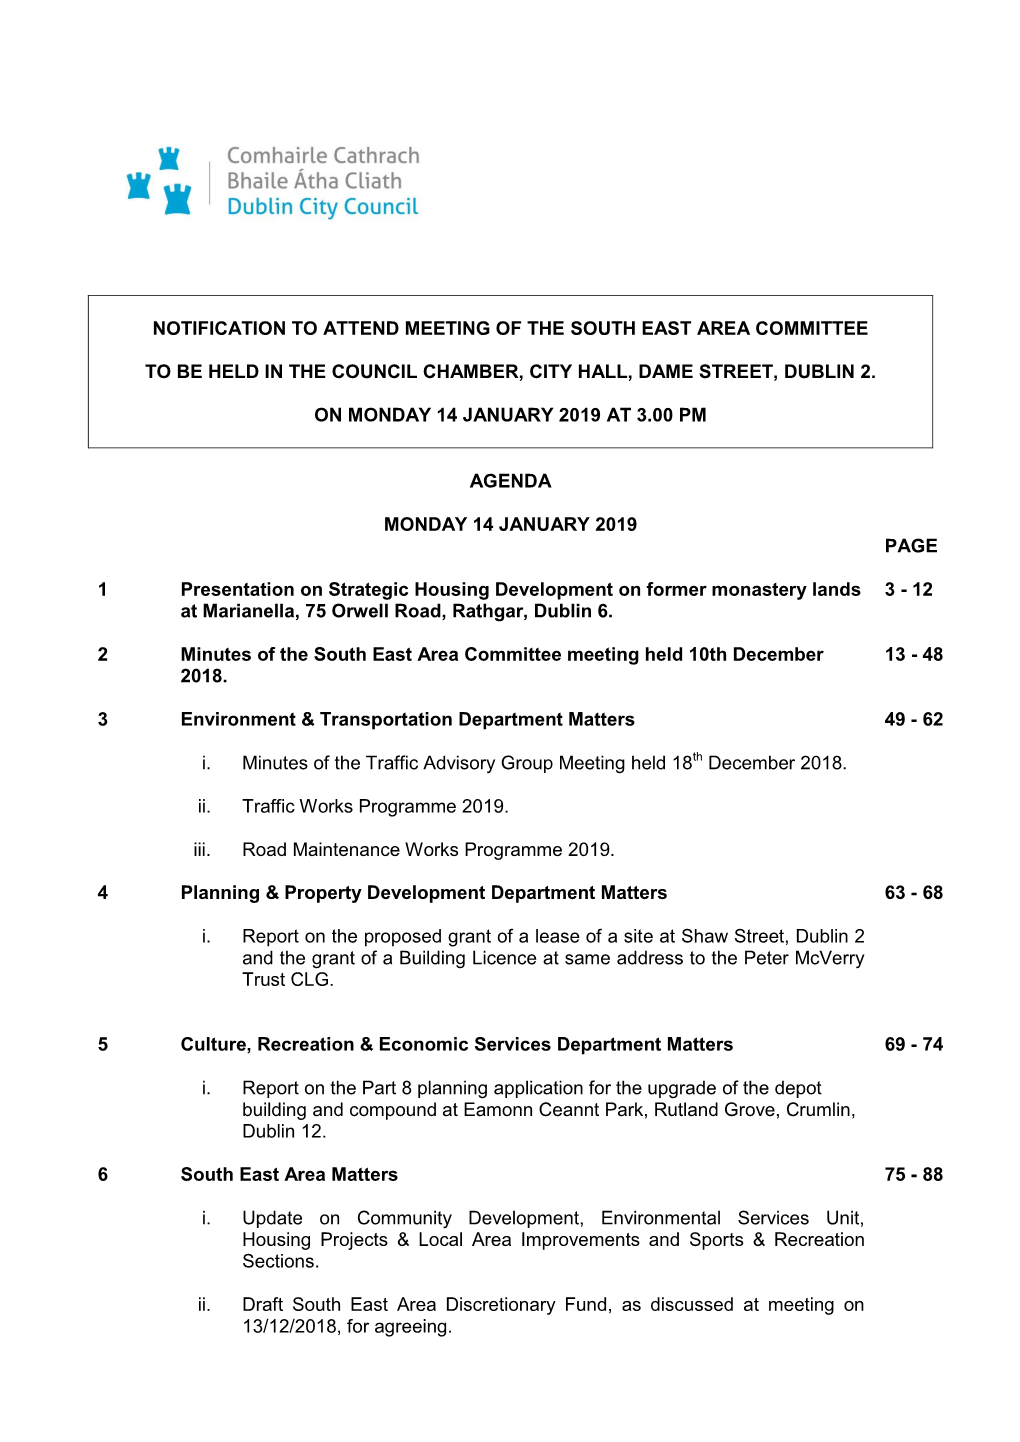 Agenda Document for South East Area Committee, 14/01/2019 15:00